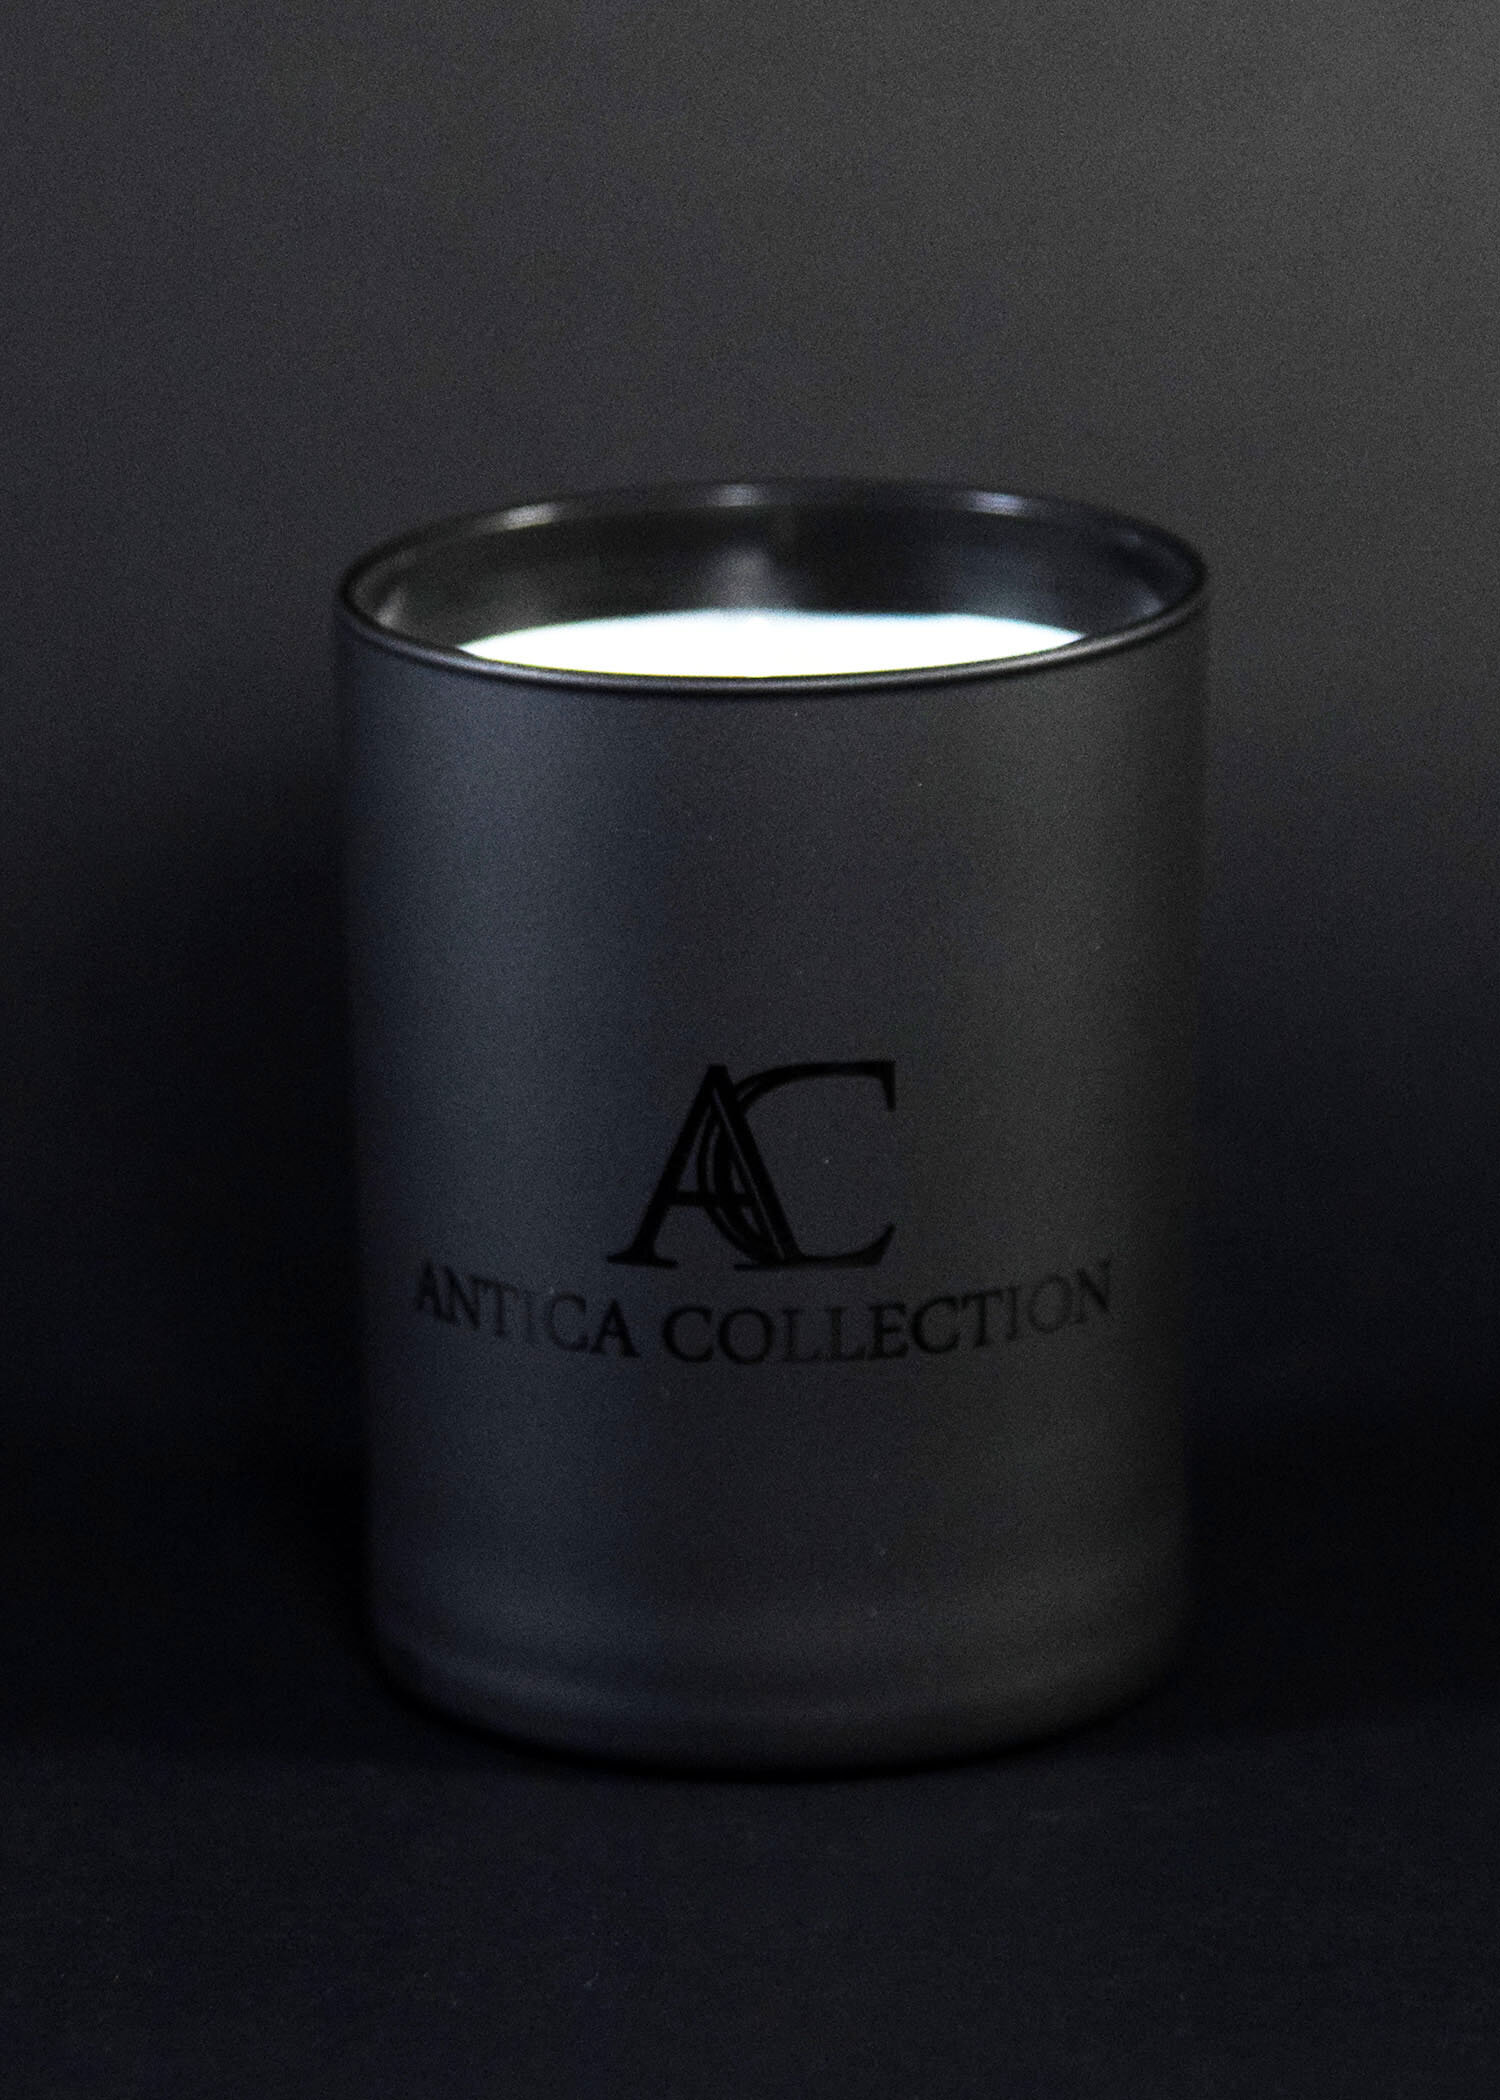 Antica Collection